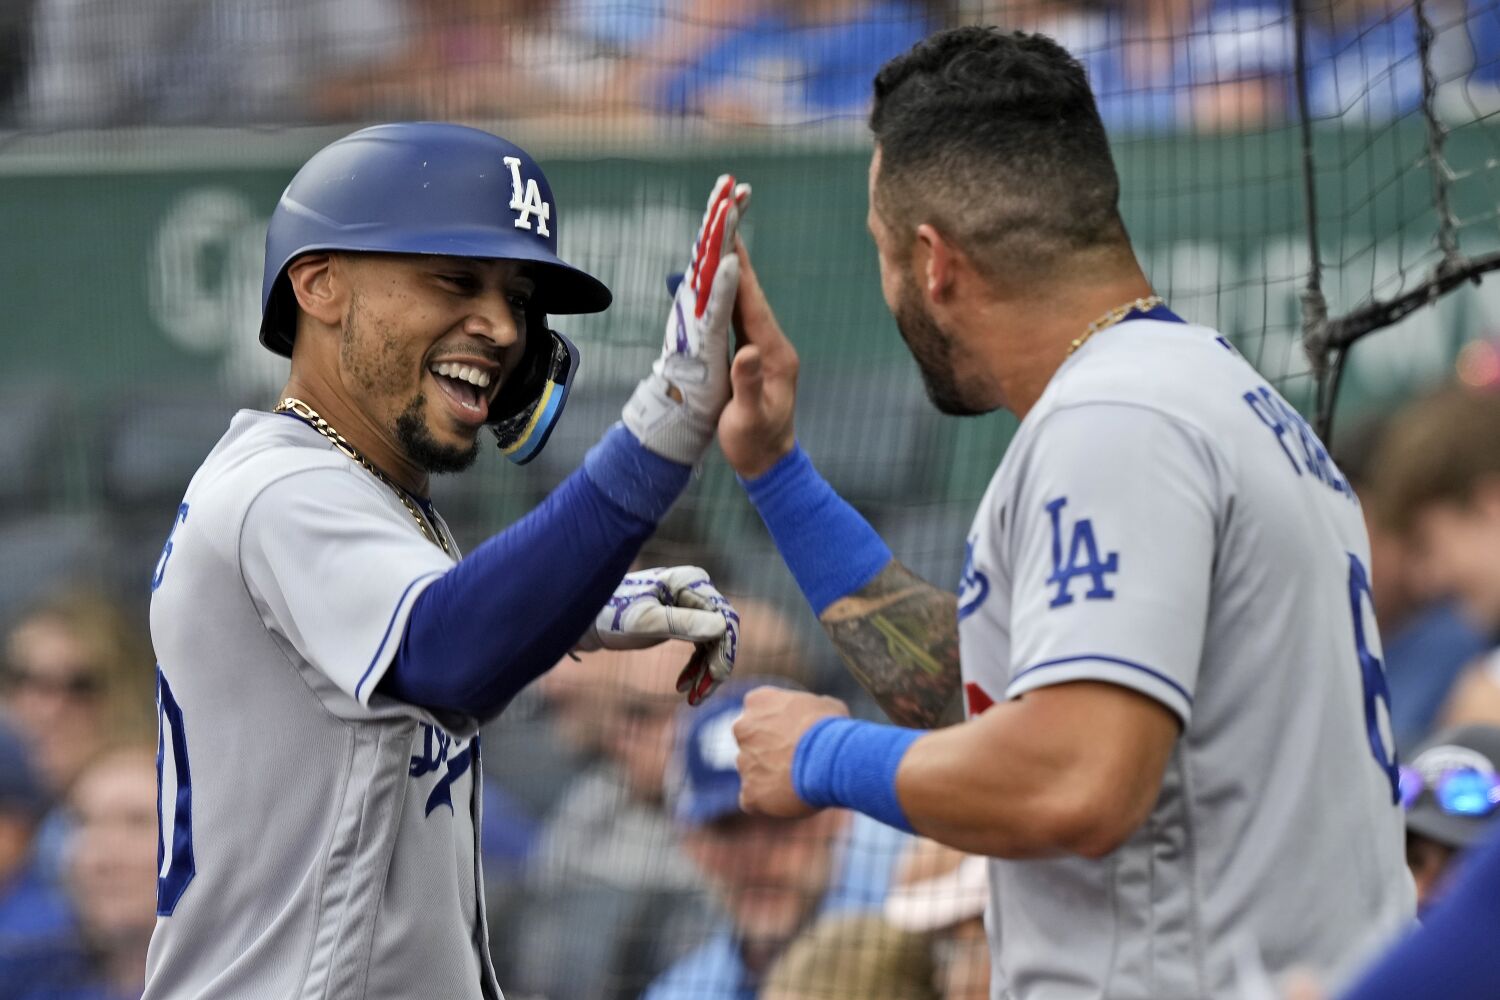 Mookie Betts shows he's ready for home run derby during Dodgers' win over Royals